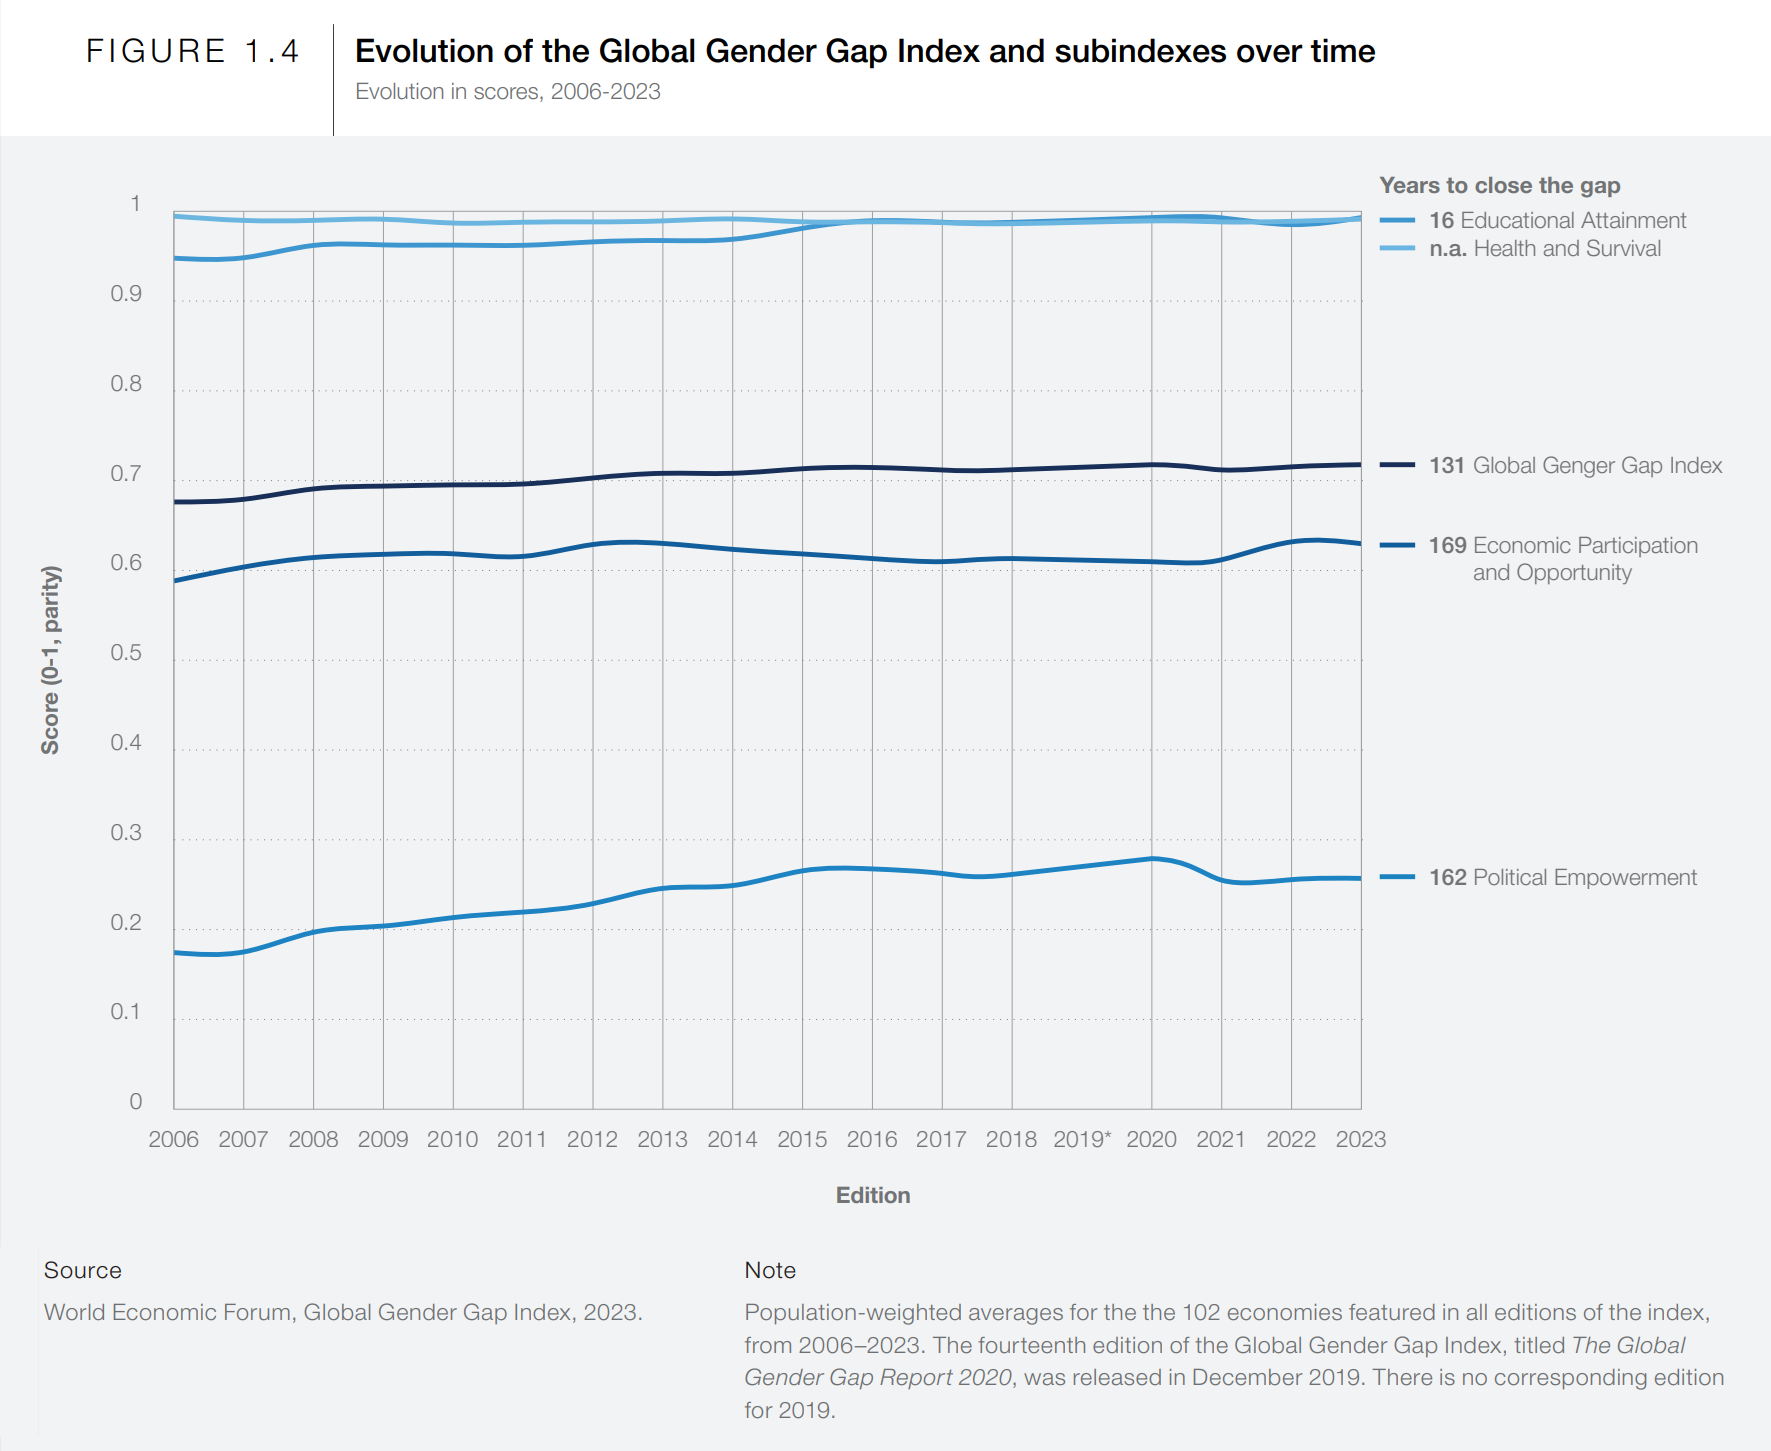 Evolution of the Global Gender Gap Index and subindexes over time, 2006-2023. The Global Gender Gap Index annually benchmarks the current state and evolution of gender parity across four key dimensions (Economic Participation and Opportunity, Educational Attainment, Health and Survival, and Political Empowerment). It is the longest-standing index tracking the progress of numerous countries’ efforts towards closing these gaps over time since its inception in 2006. Graphic: World Economic Forum